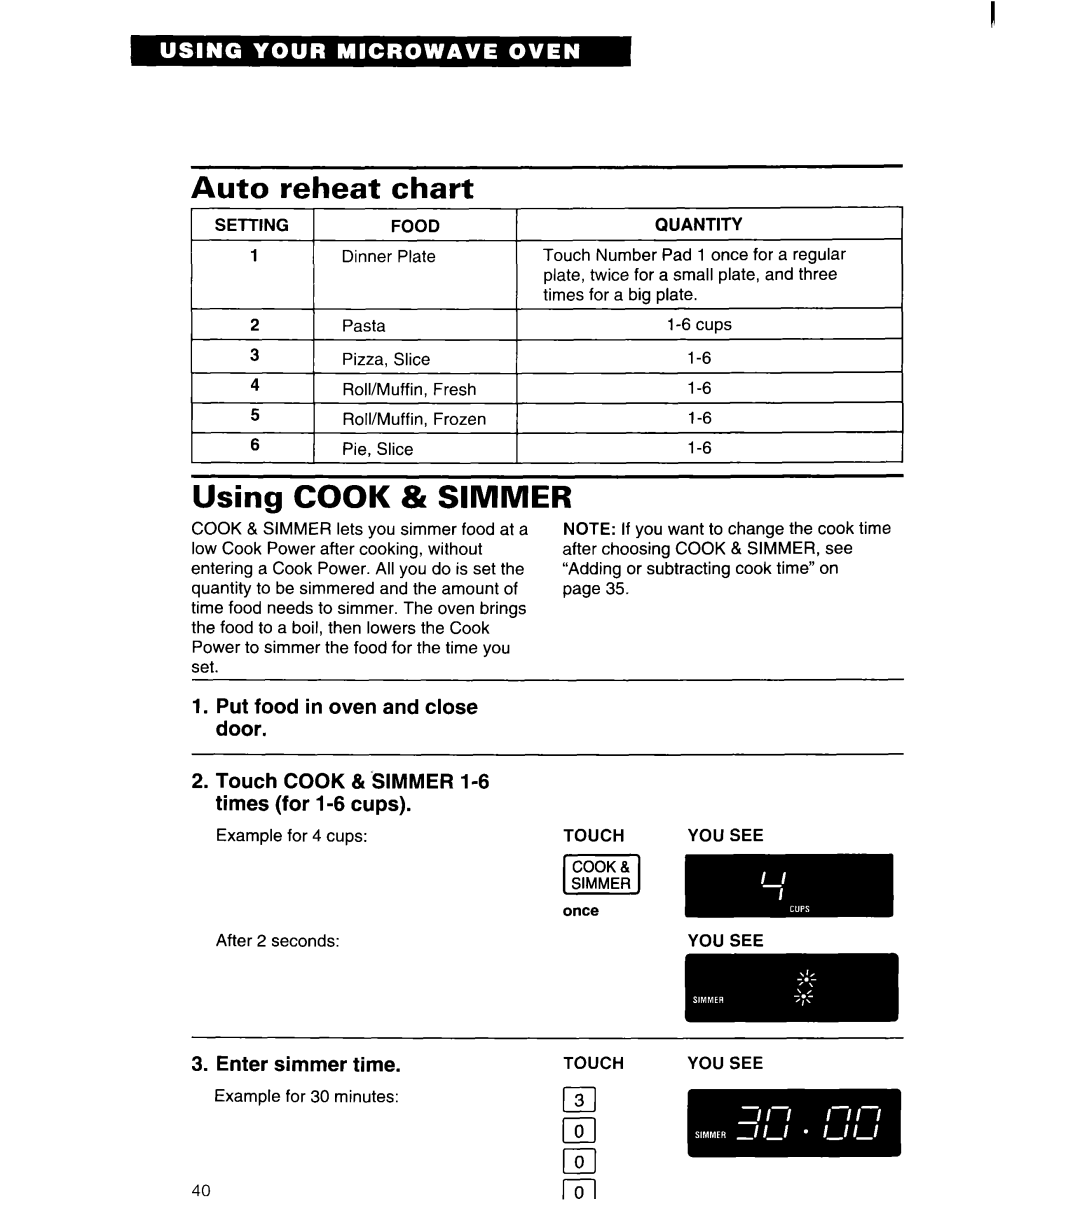 Whirlpool MT6120XBQ Auto reheat chart, Cook, Simmer, ElEBR, Using, Put food in oven and close door, Enter simmer time 